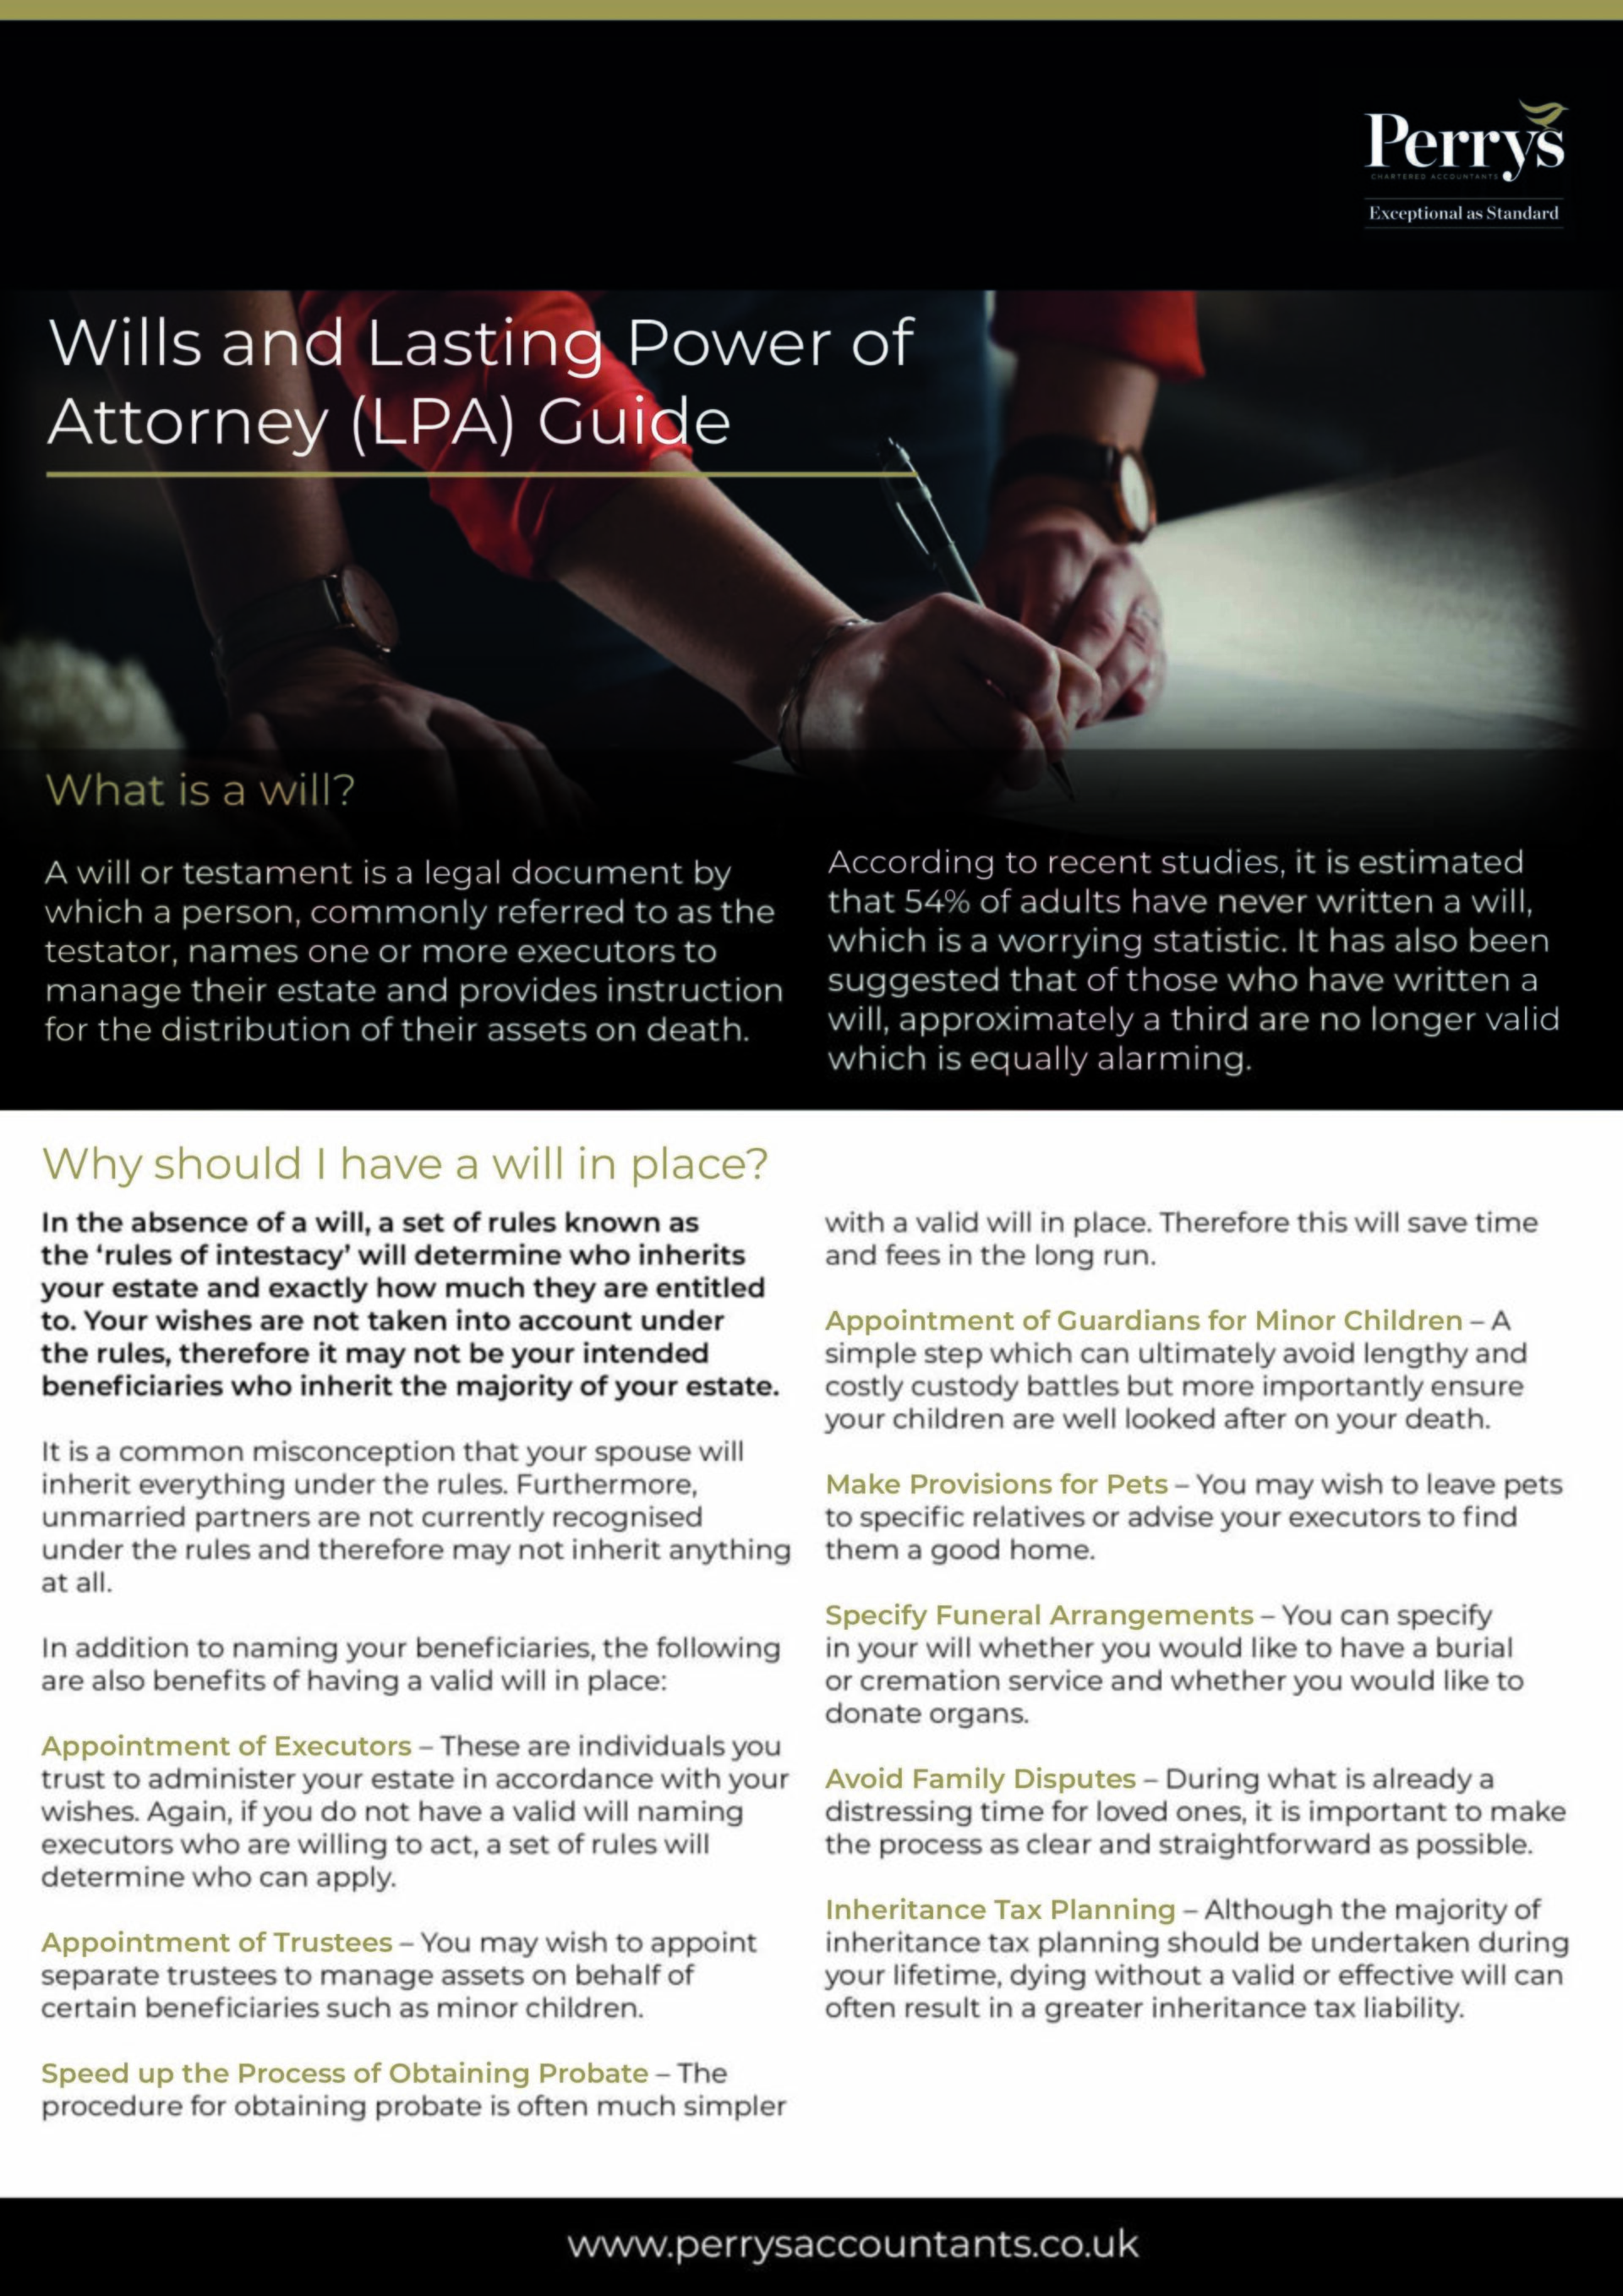 Wills and Lasting Power of Attorney (LPA) Guide